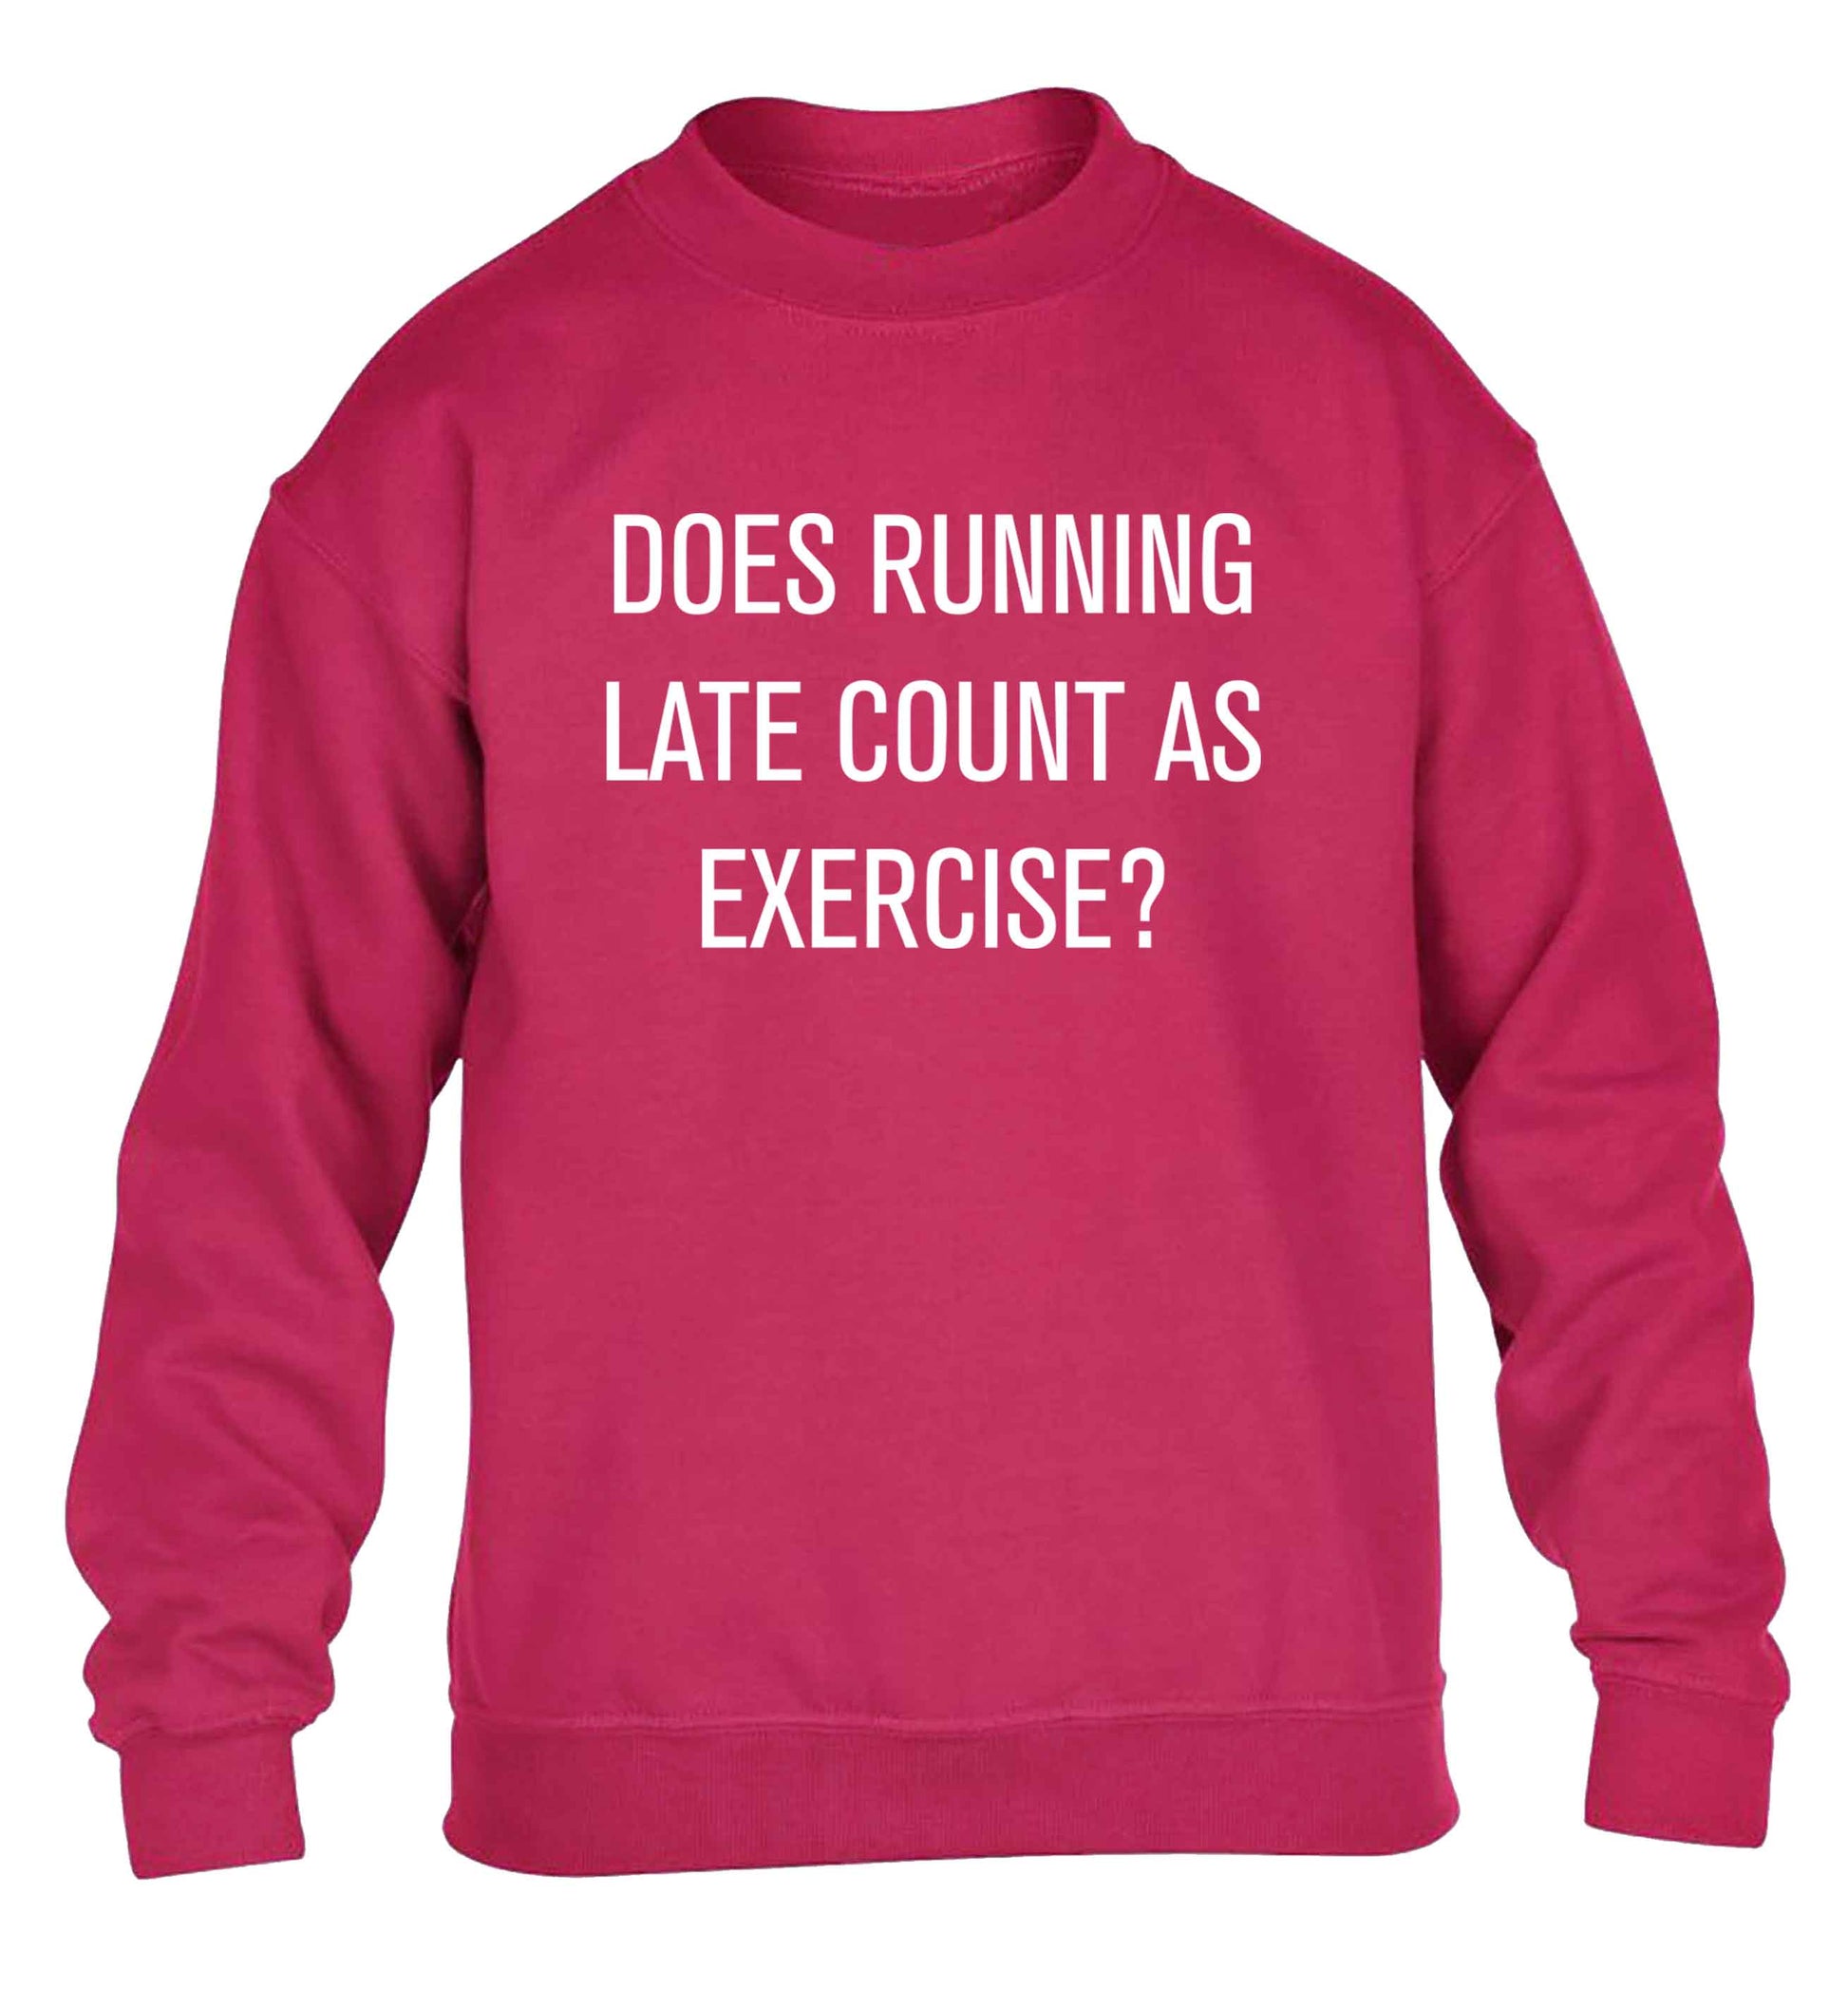 Does running late count as exercise? children's pink sweater 12-13 Years